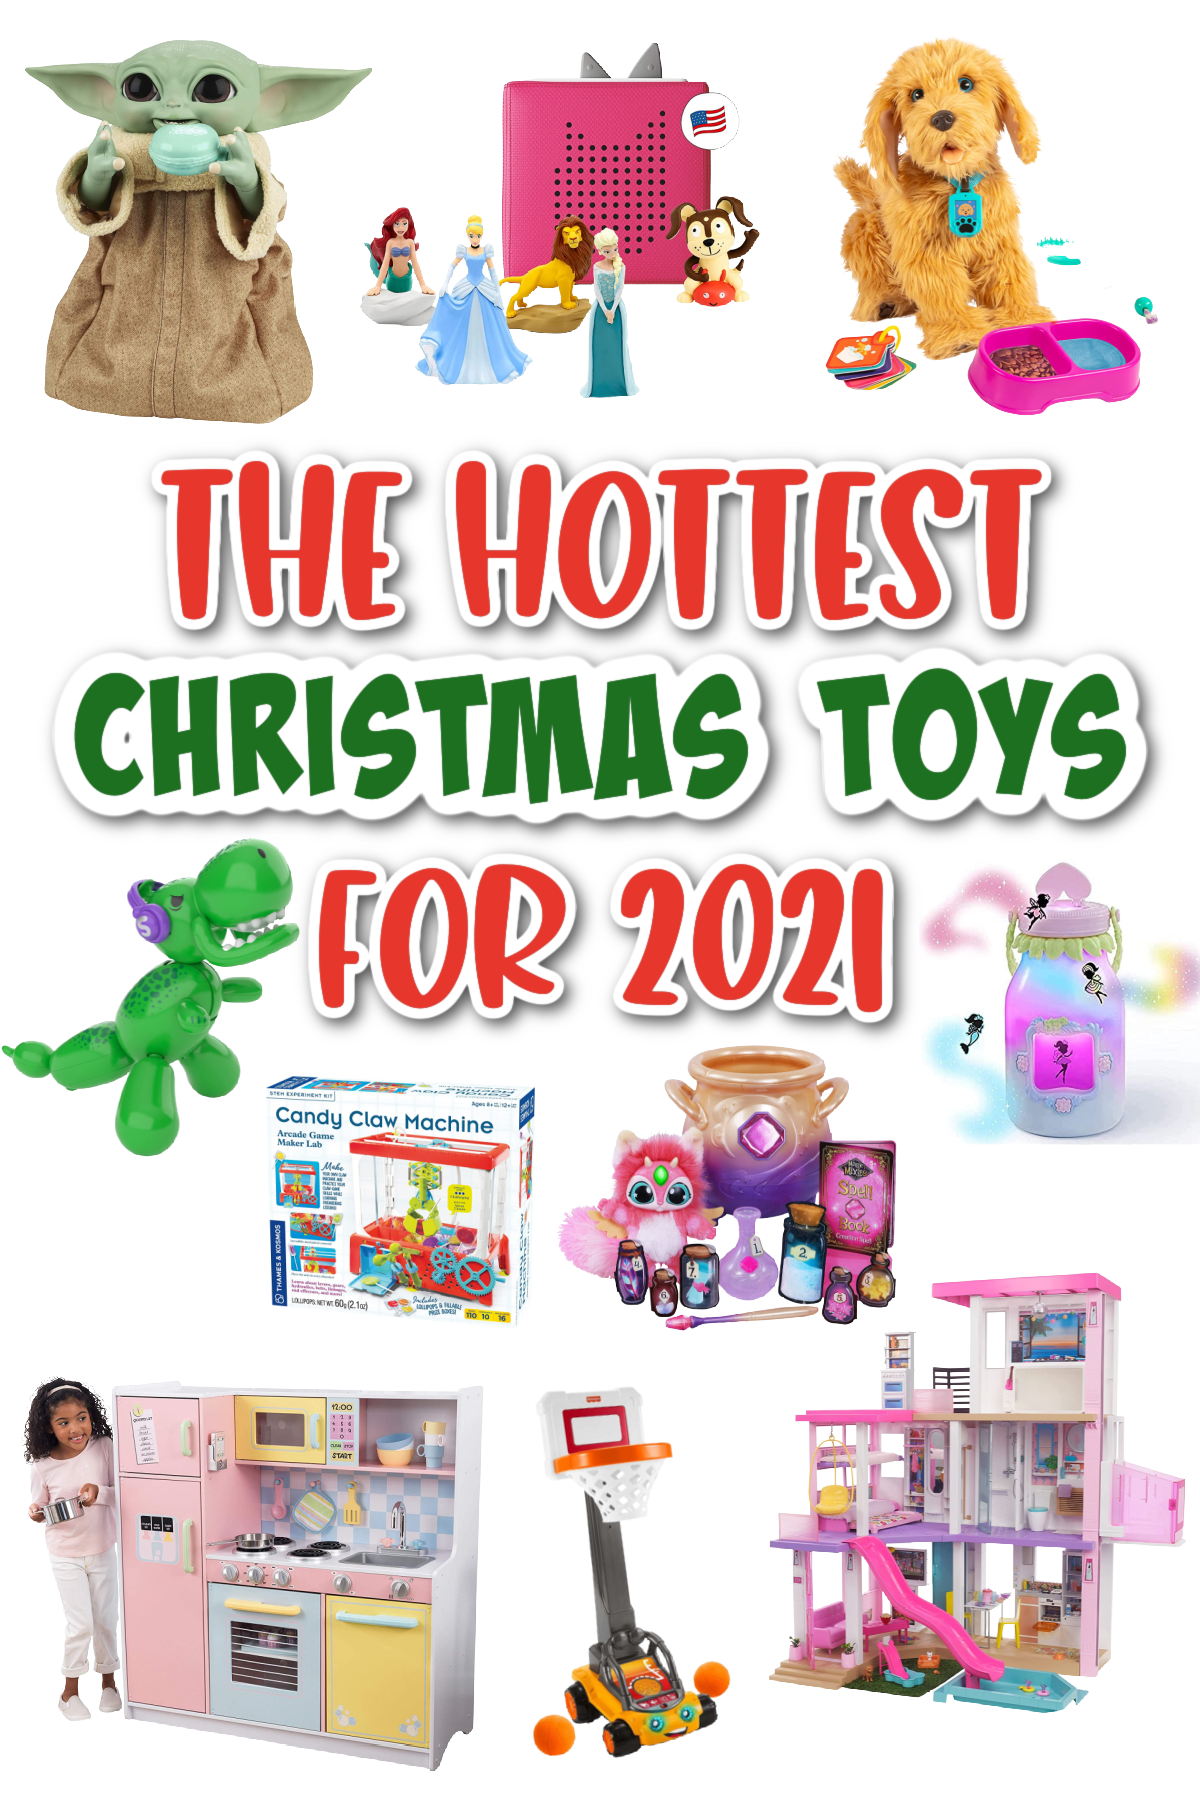 Pictures of the Hottest Christmas Toys for 2021